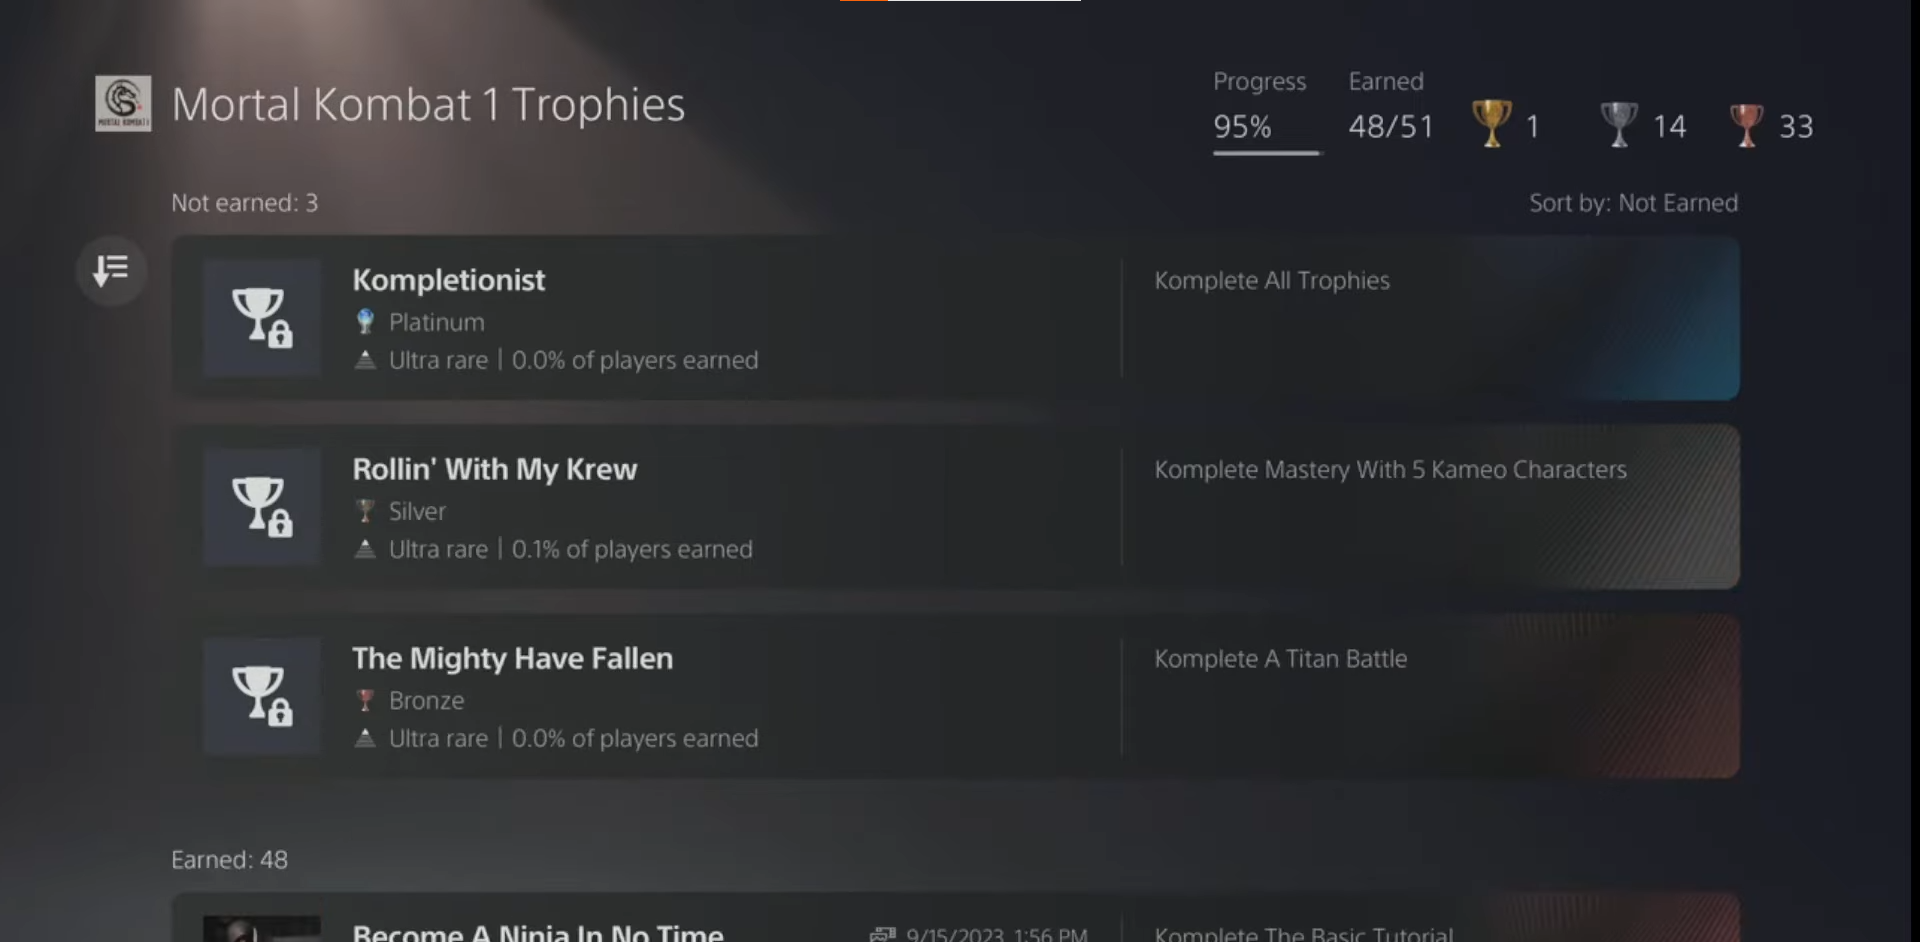 A screenshot of The Mighty Have Fallen achievement in Mortal Kombat 1. 